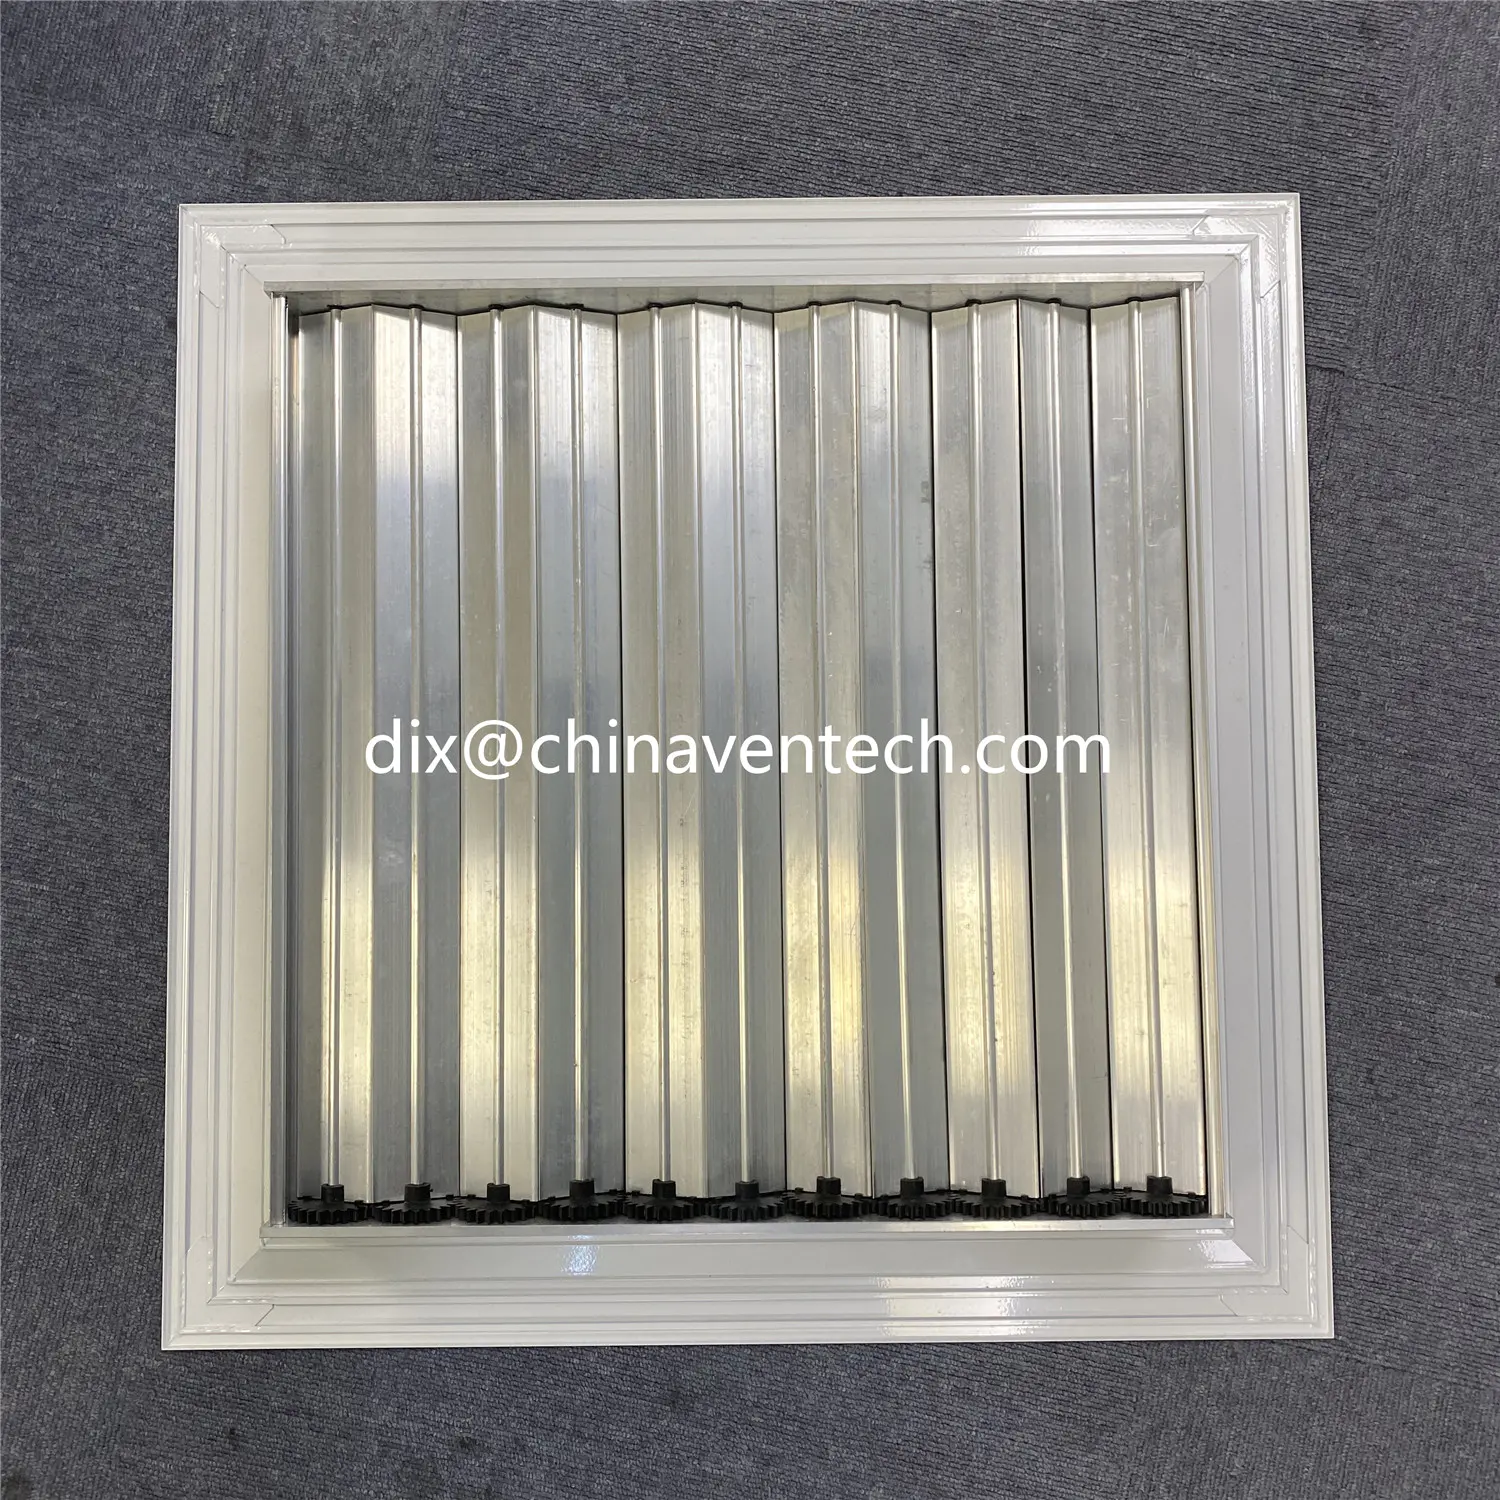 HVAC air conditioning ceiling ventilation square supply air 4 way directional diffuser